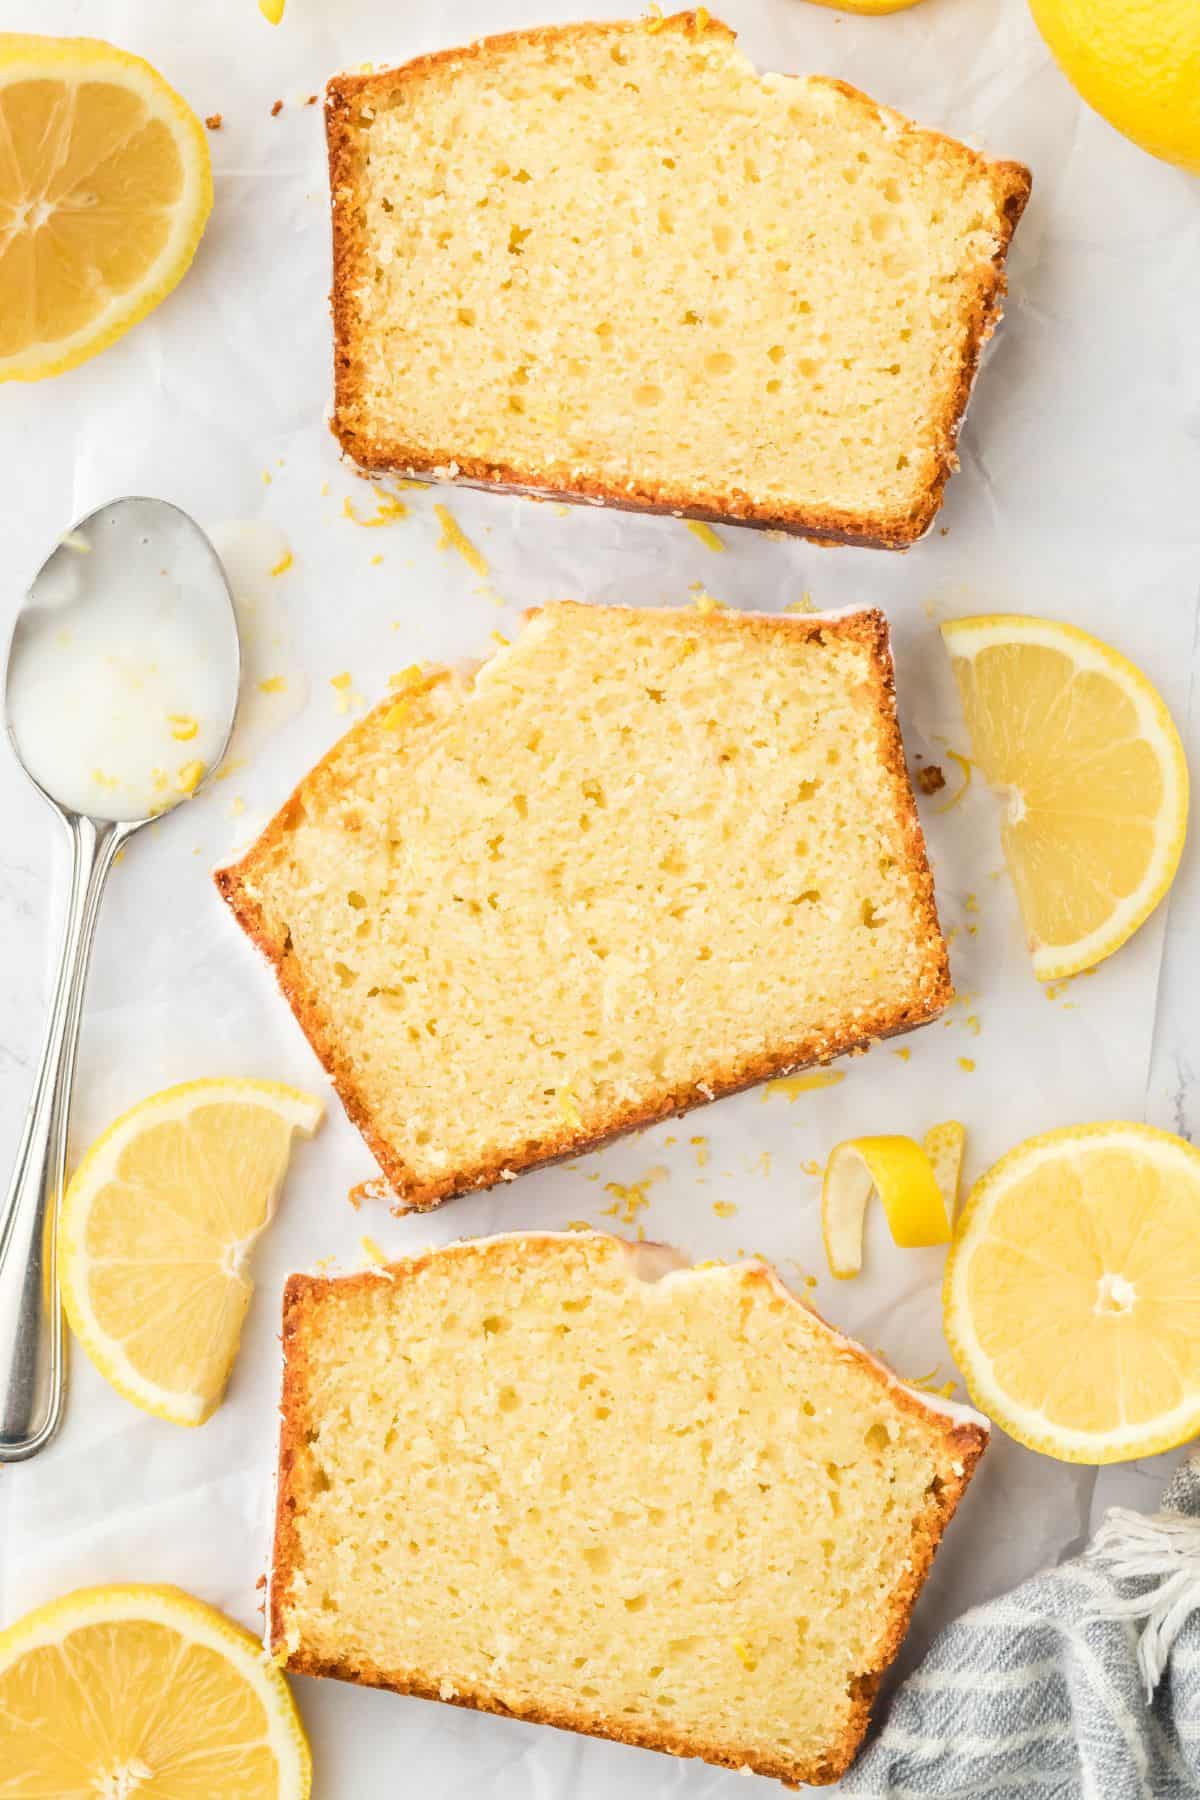 Slices of lemon loaf cake laying on parchment on the table with lemons and slices around it.